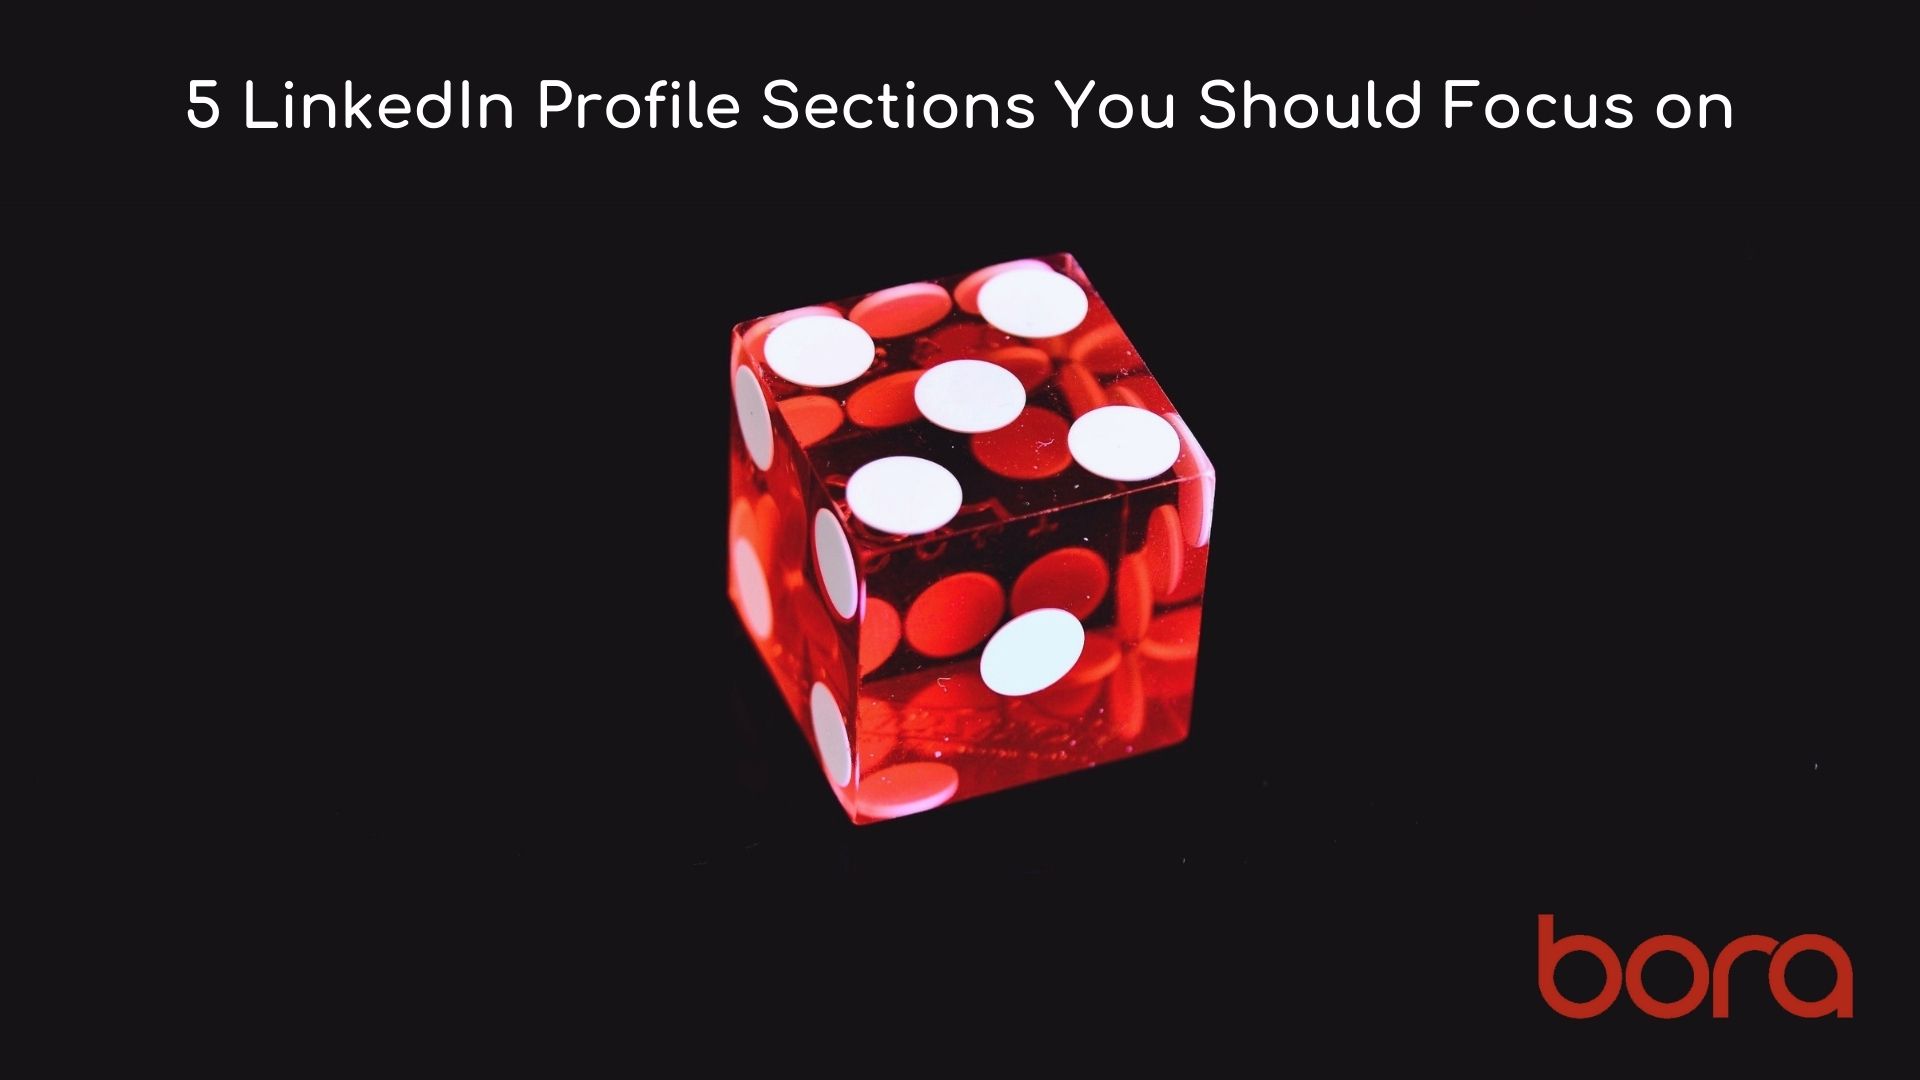 5 LinkedIn Profile Sections You Should Focus on